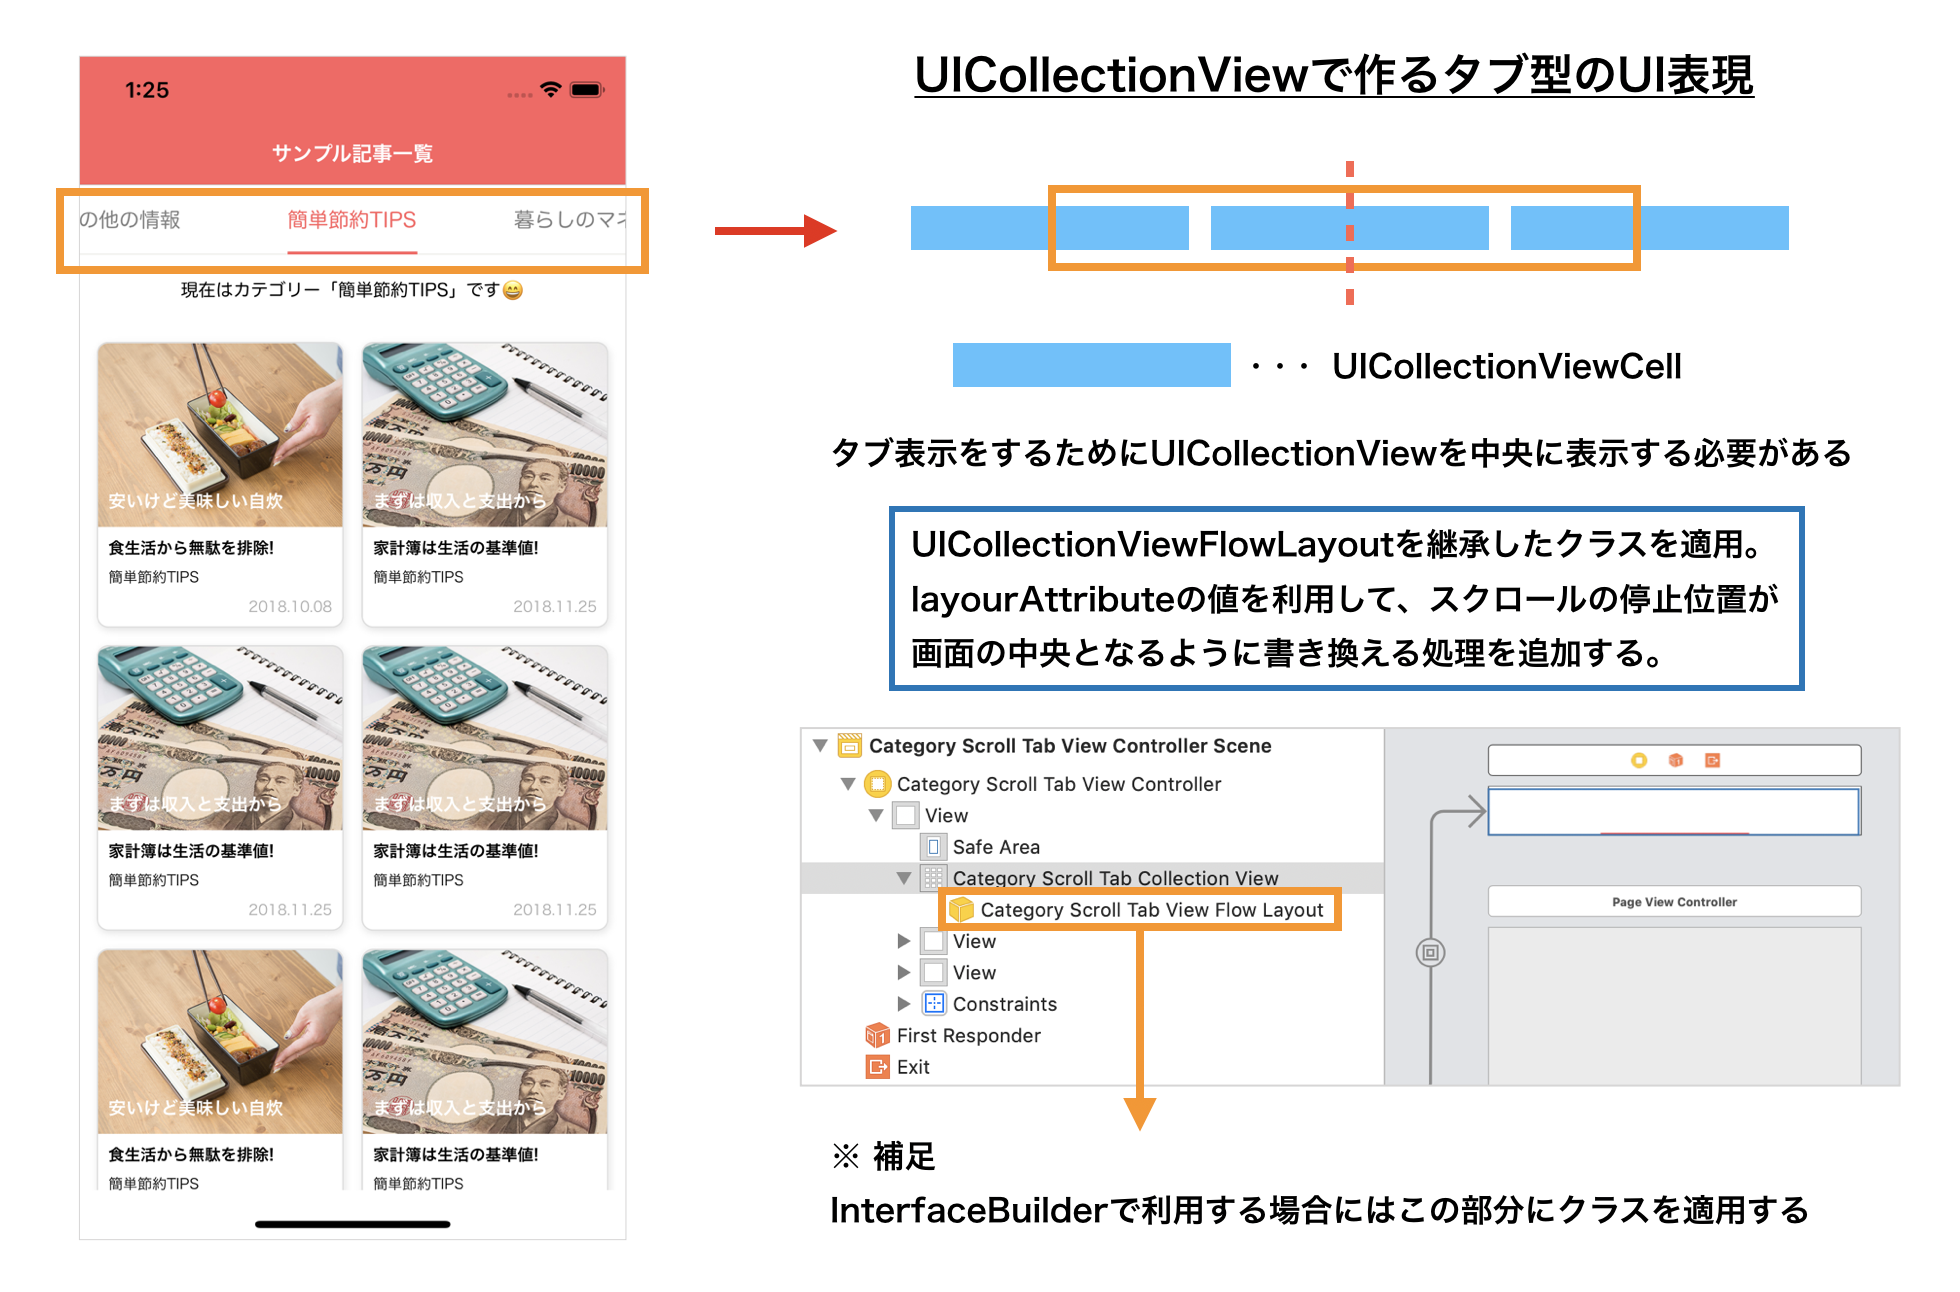 uicollectionview_layout_atrributes.png